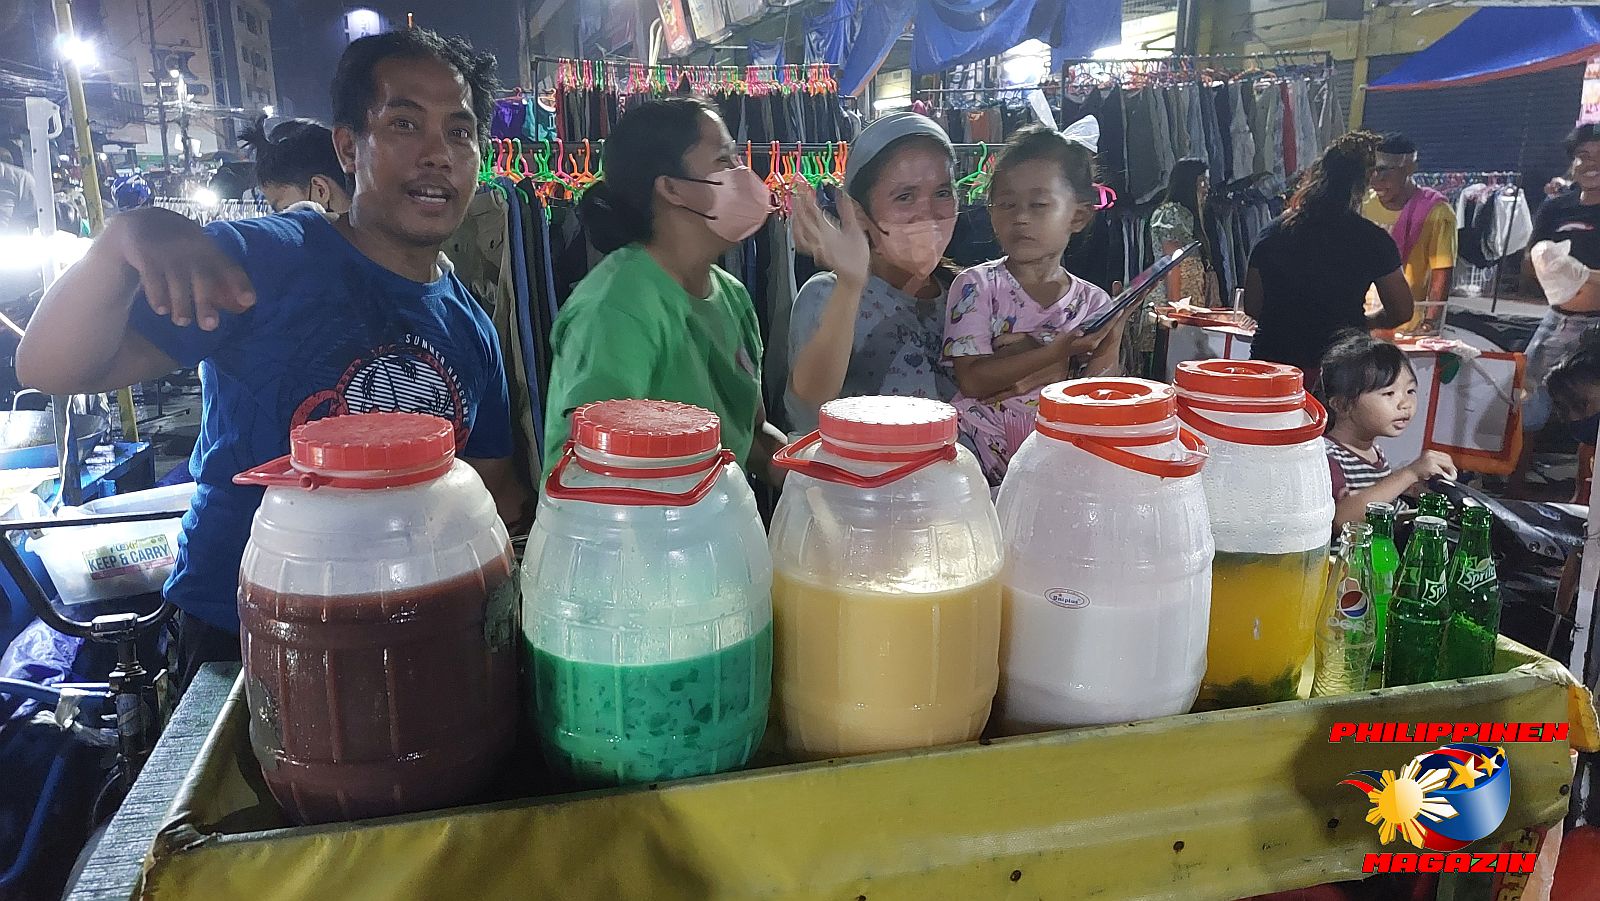 SIGHTS OF CAGAYAN DE ORO CITY & NORTHERN MINDANAO - Mobile Refreshment Vendors at the Night Market  Photo by Sir Dieter Sokoll, KOR